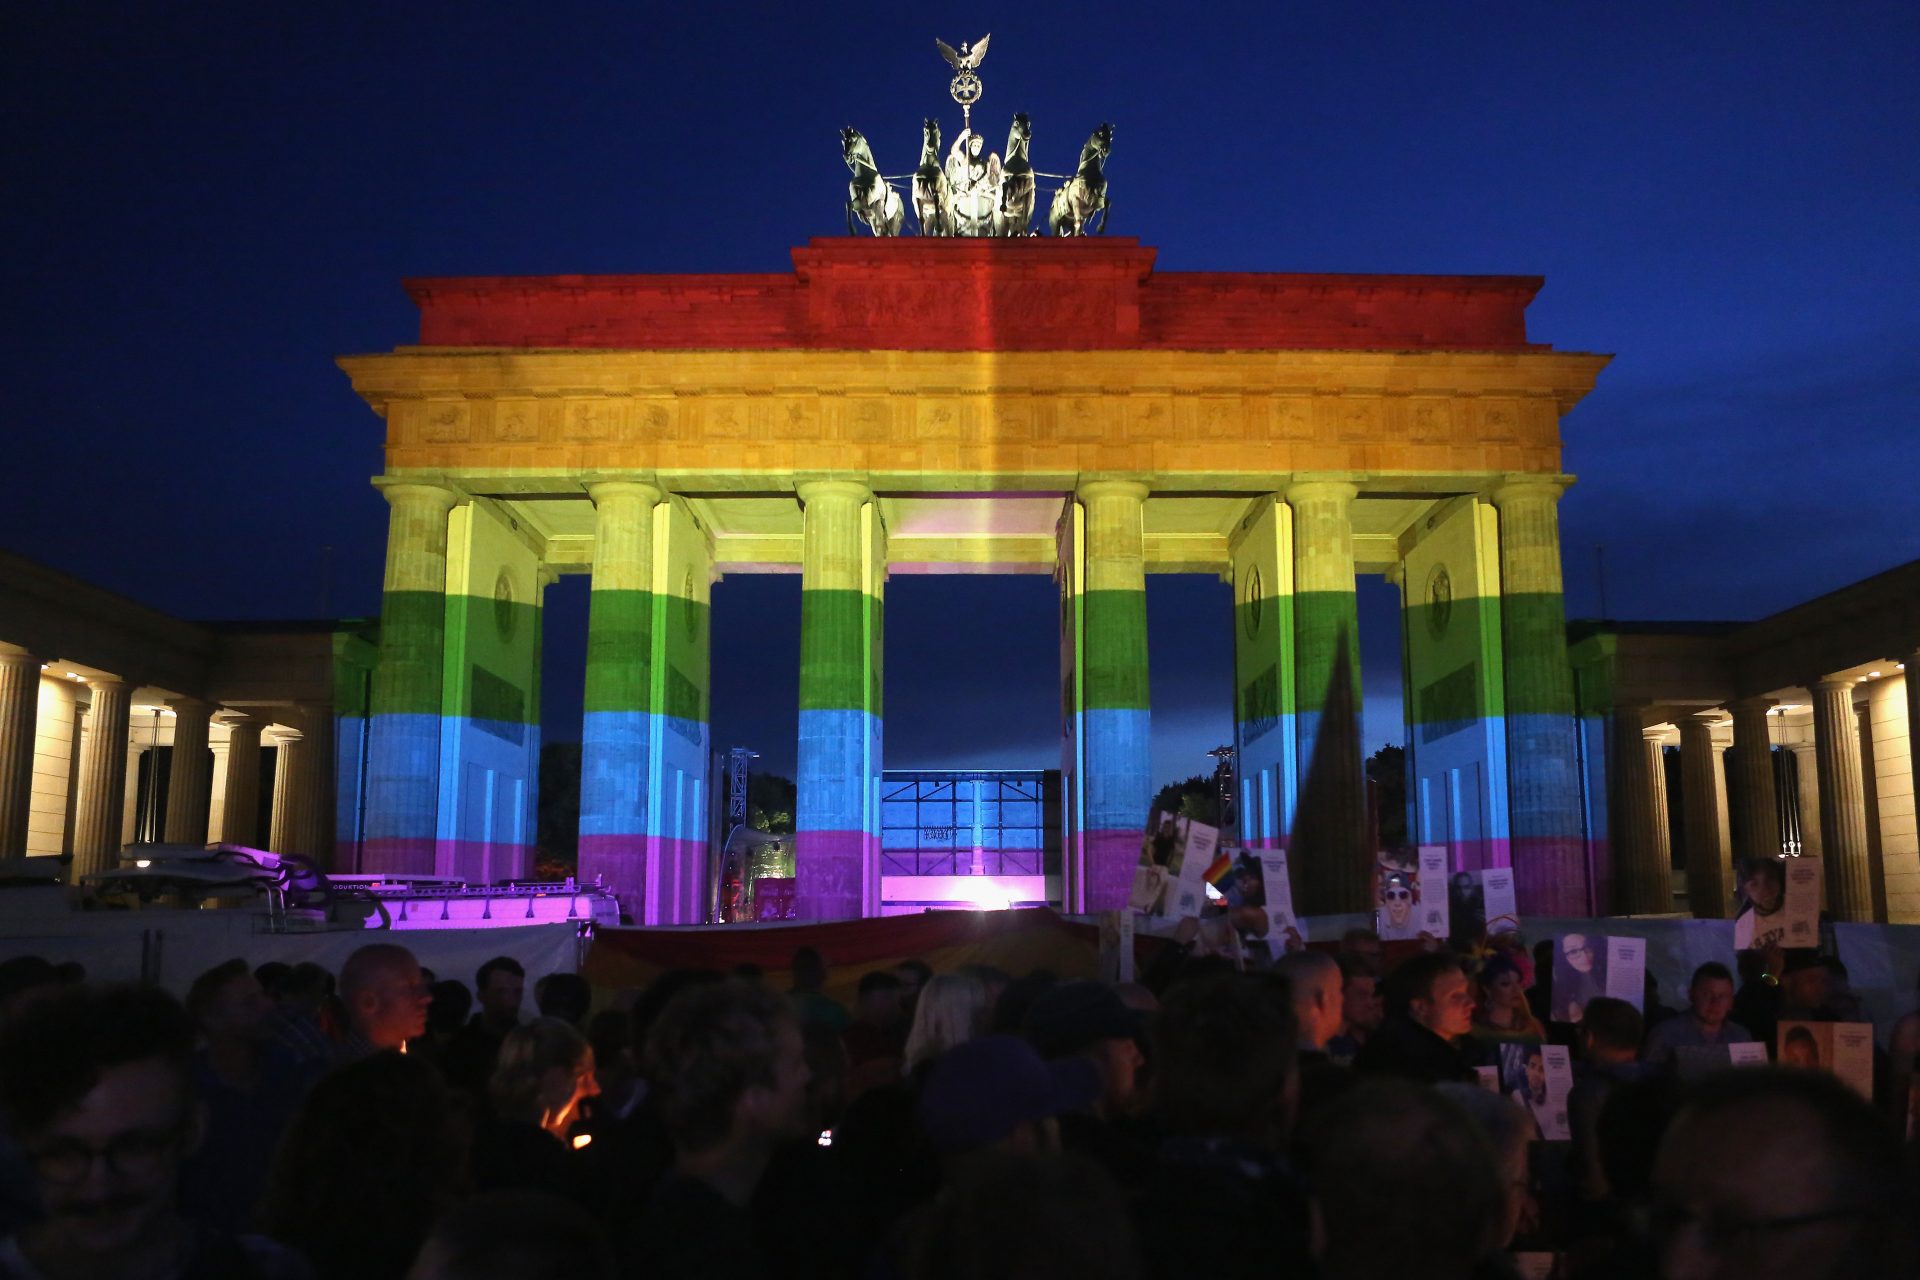 <p>With World War II as a gruesome exception, German society and government have generally accepted and welcomed people from the LGBTQ community. Present-day Germany is recognized for being one of the most gay-friendly places in the world. Its score of 10 in the ranking proves it.</p>